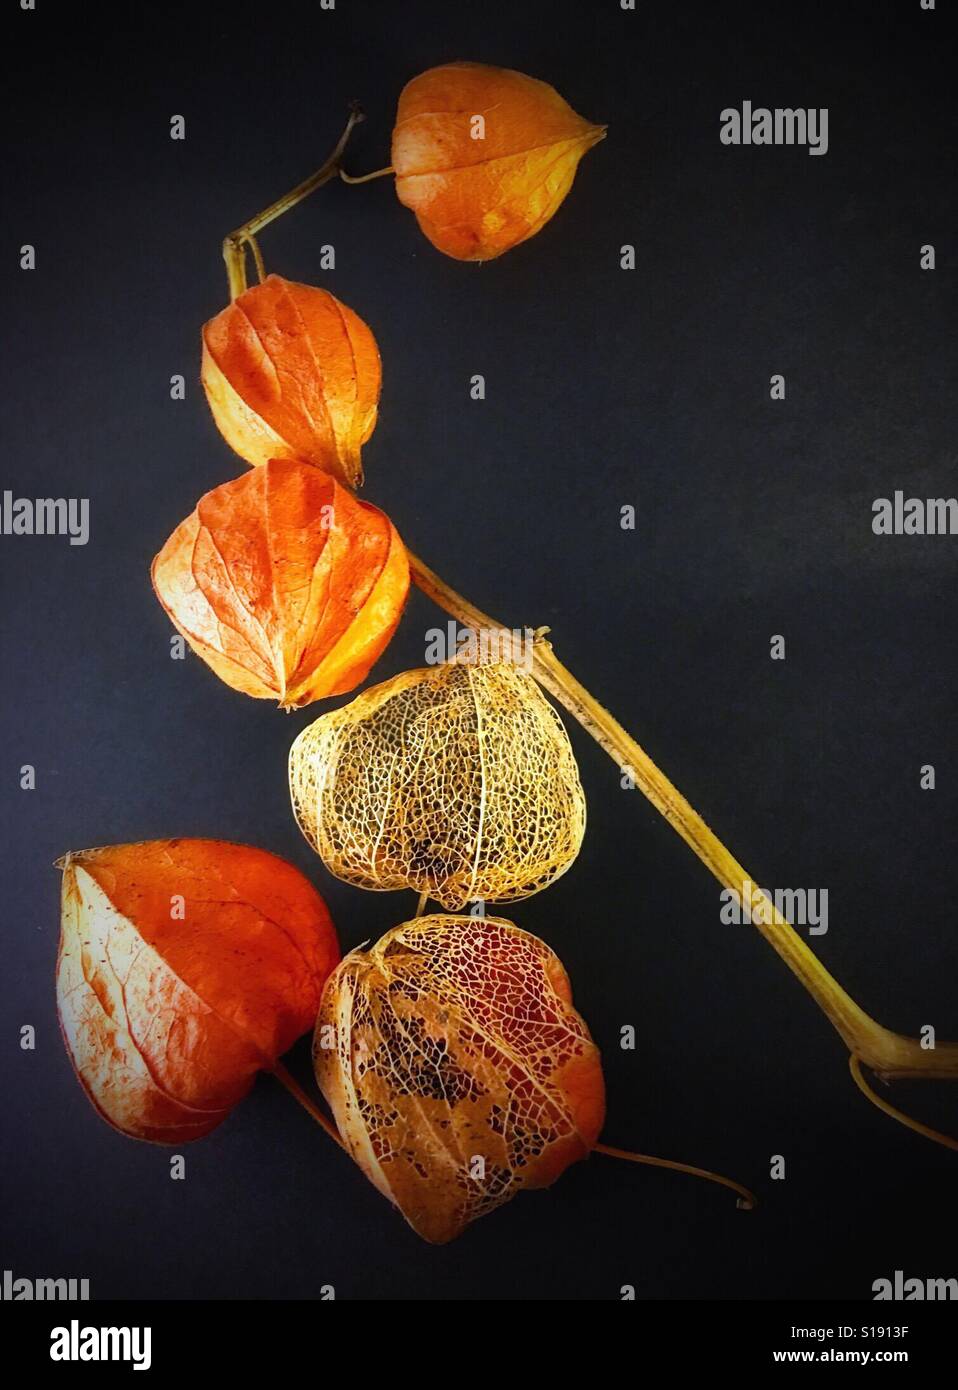 Chinese lantern plant showing different stages of decay Stock Photo